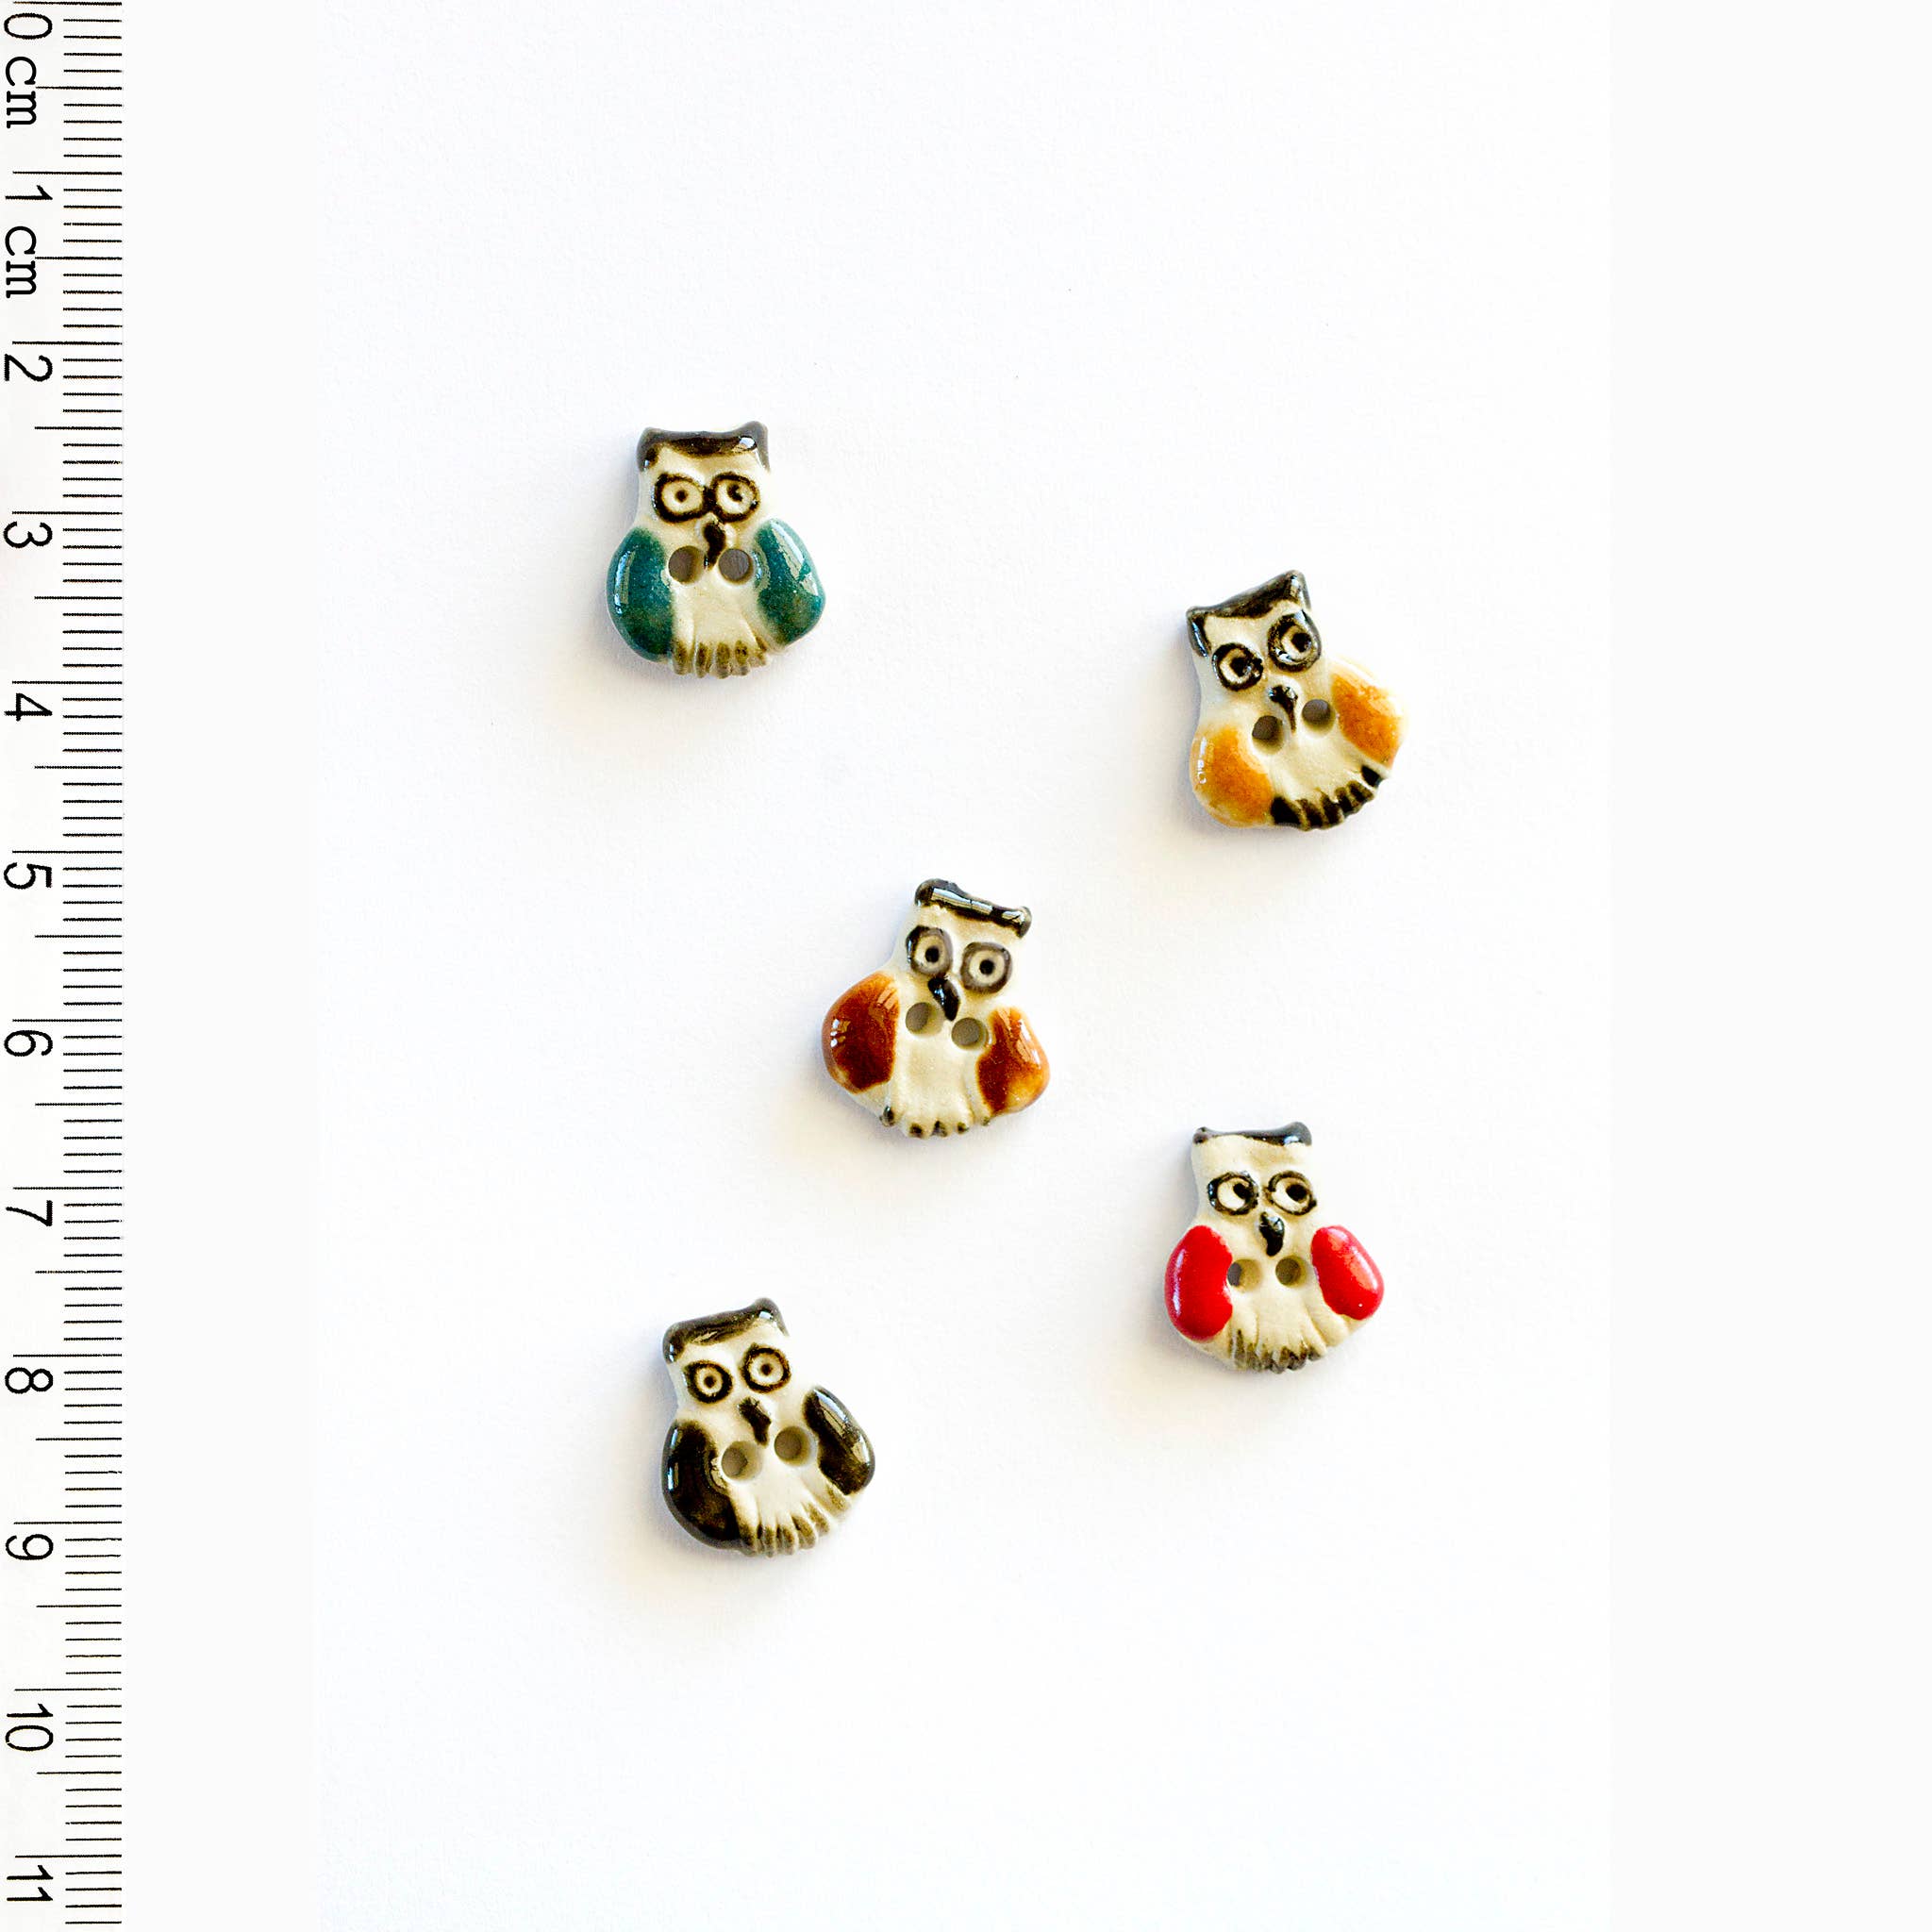 Incomparable Buttons - 5 Owl Buttons